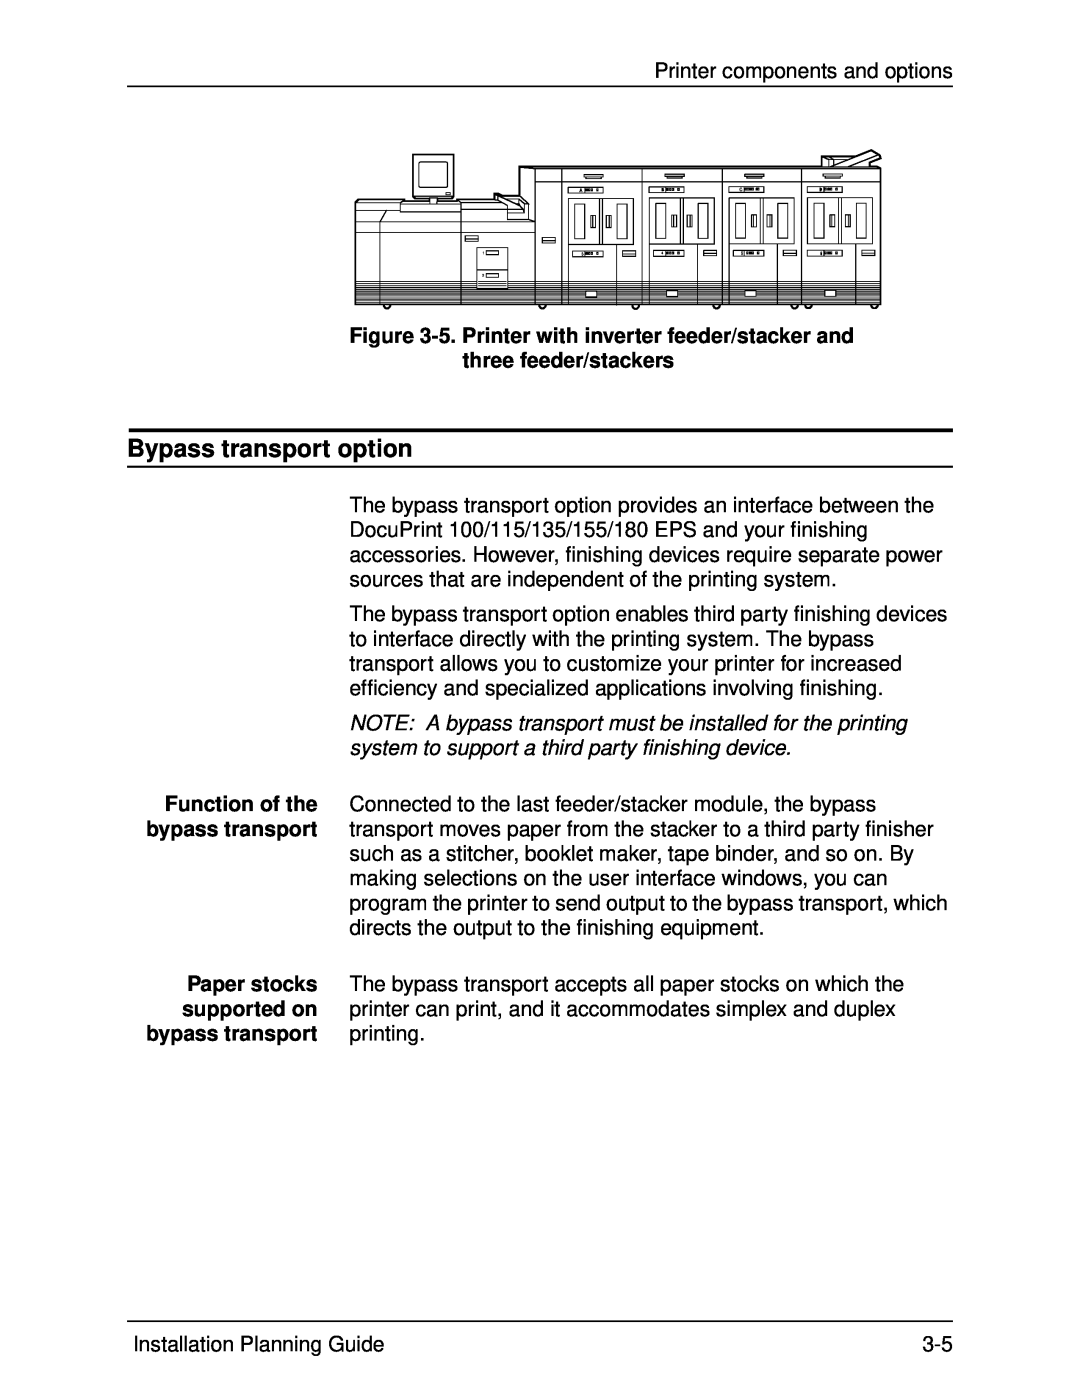 Xerox 155 NOTE A bypass transport must be installed for the printing, system to support a third party finishing device 